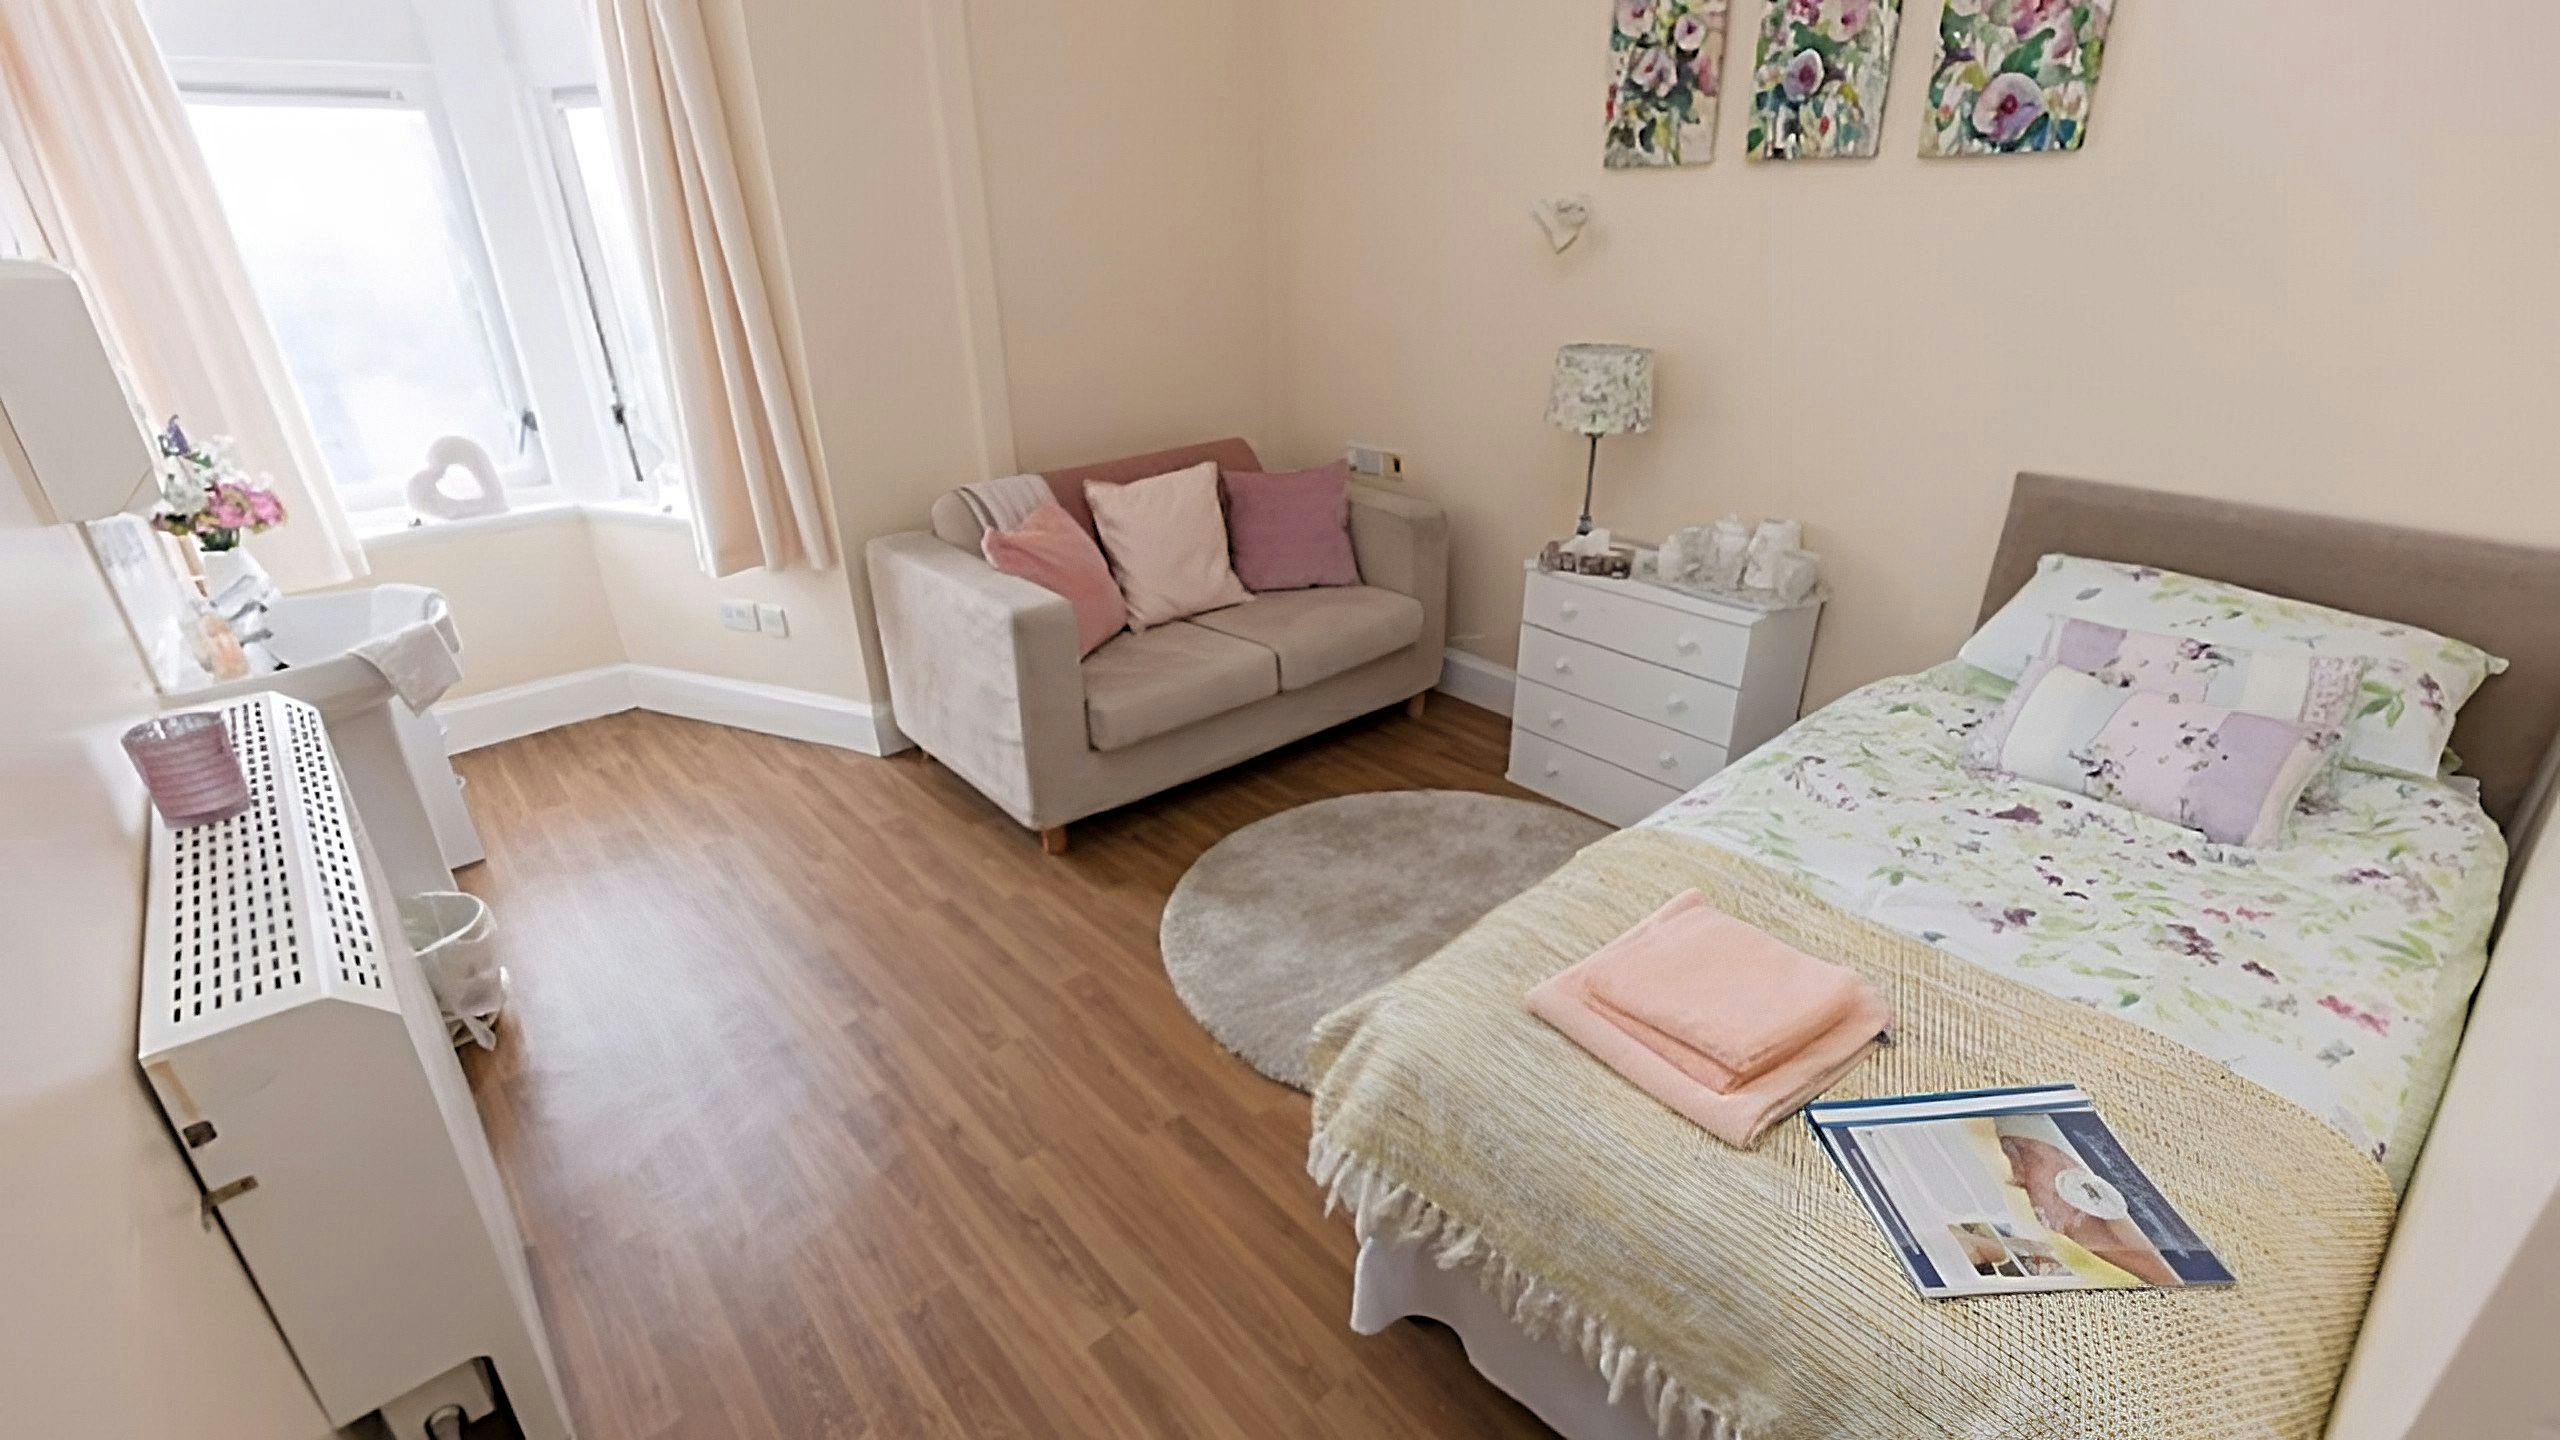 Countrywide - Thorntree Mews care home 2